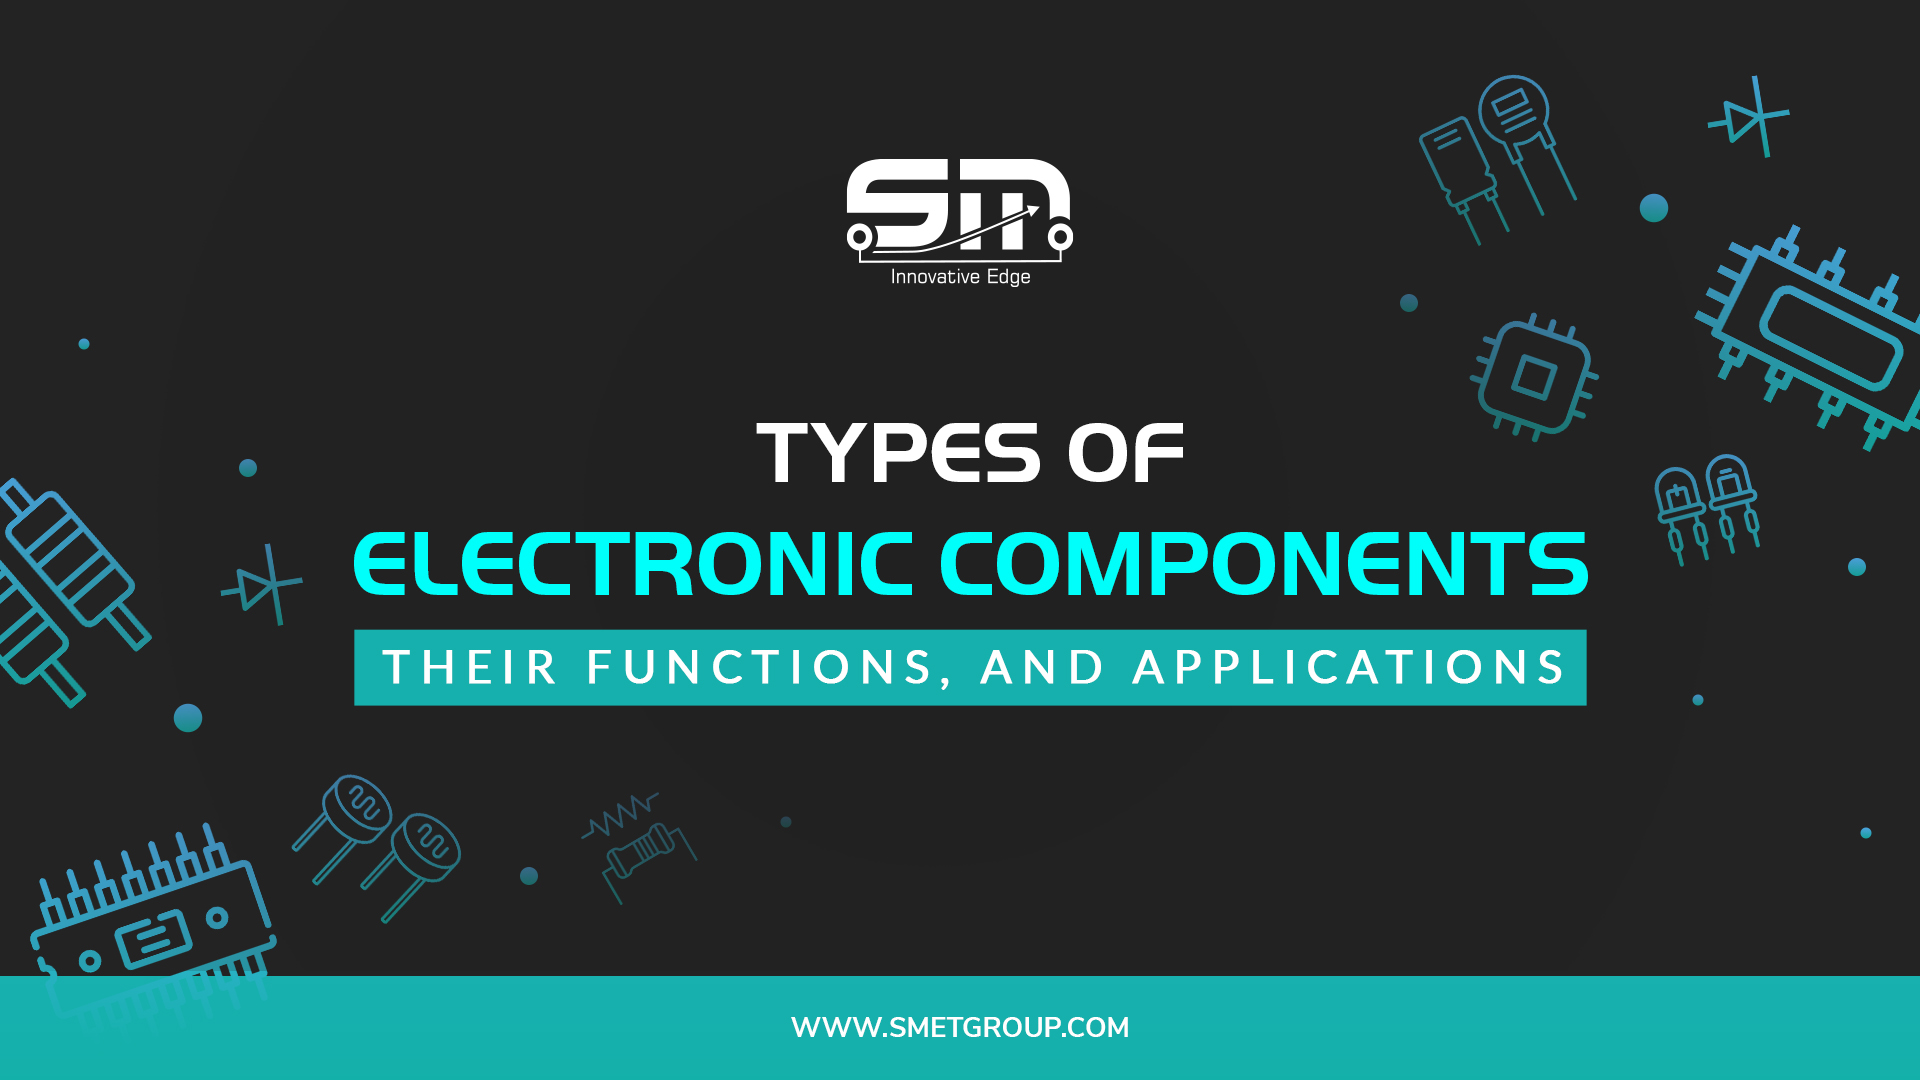 Types of Electronic Components, their Functions and Applications